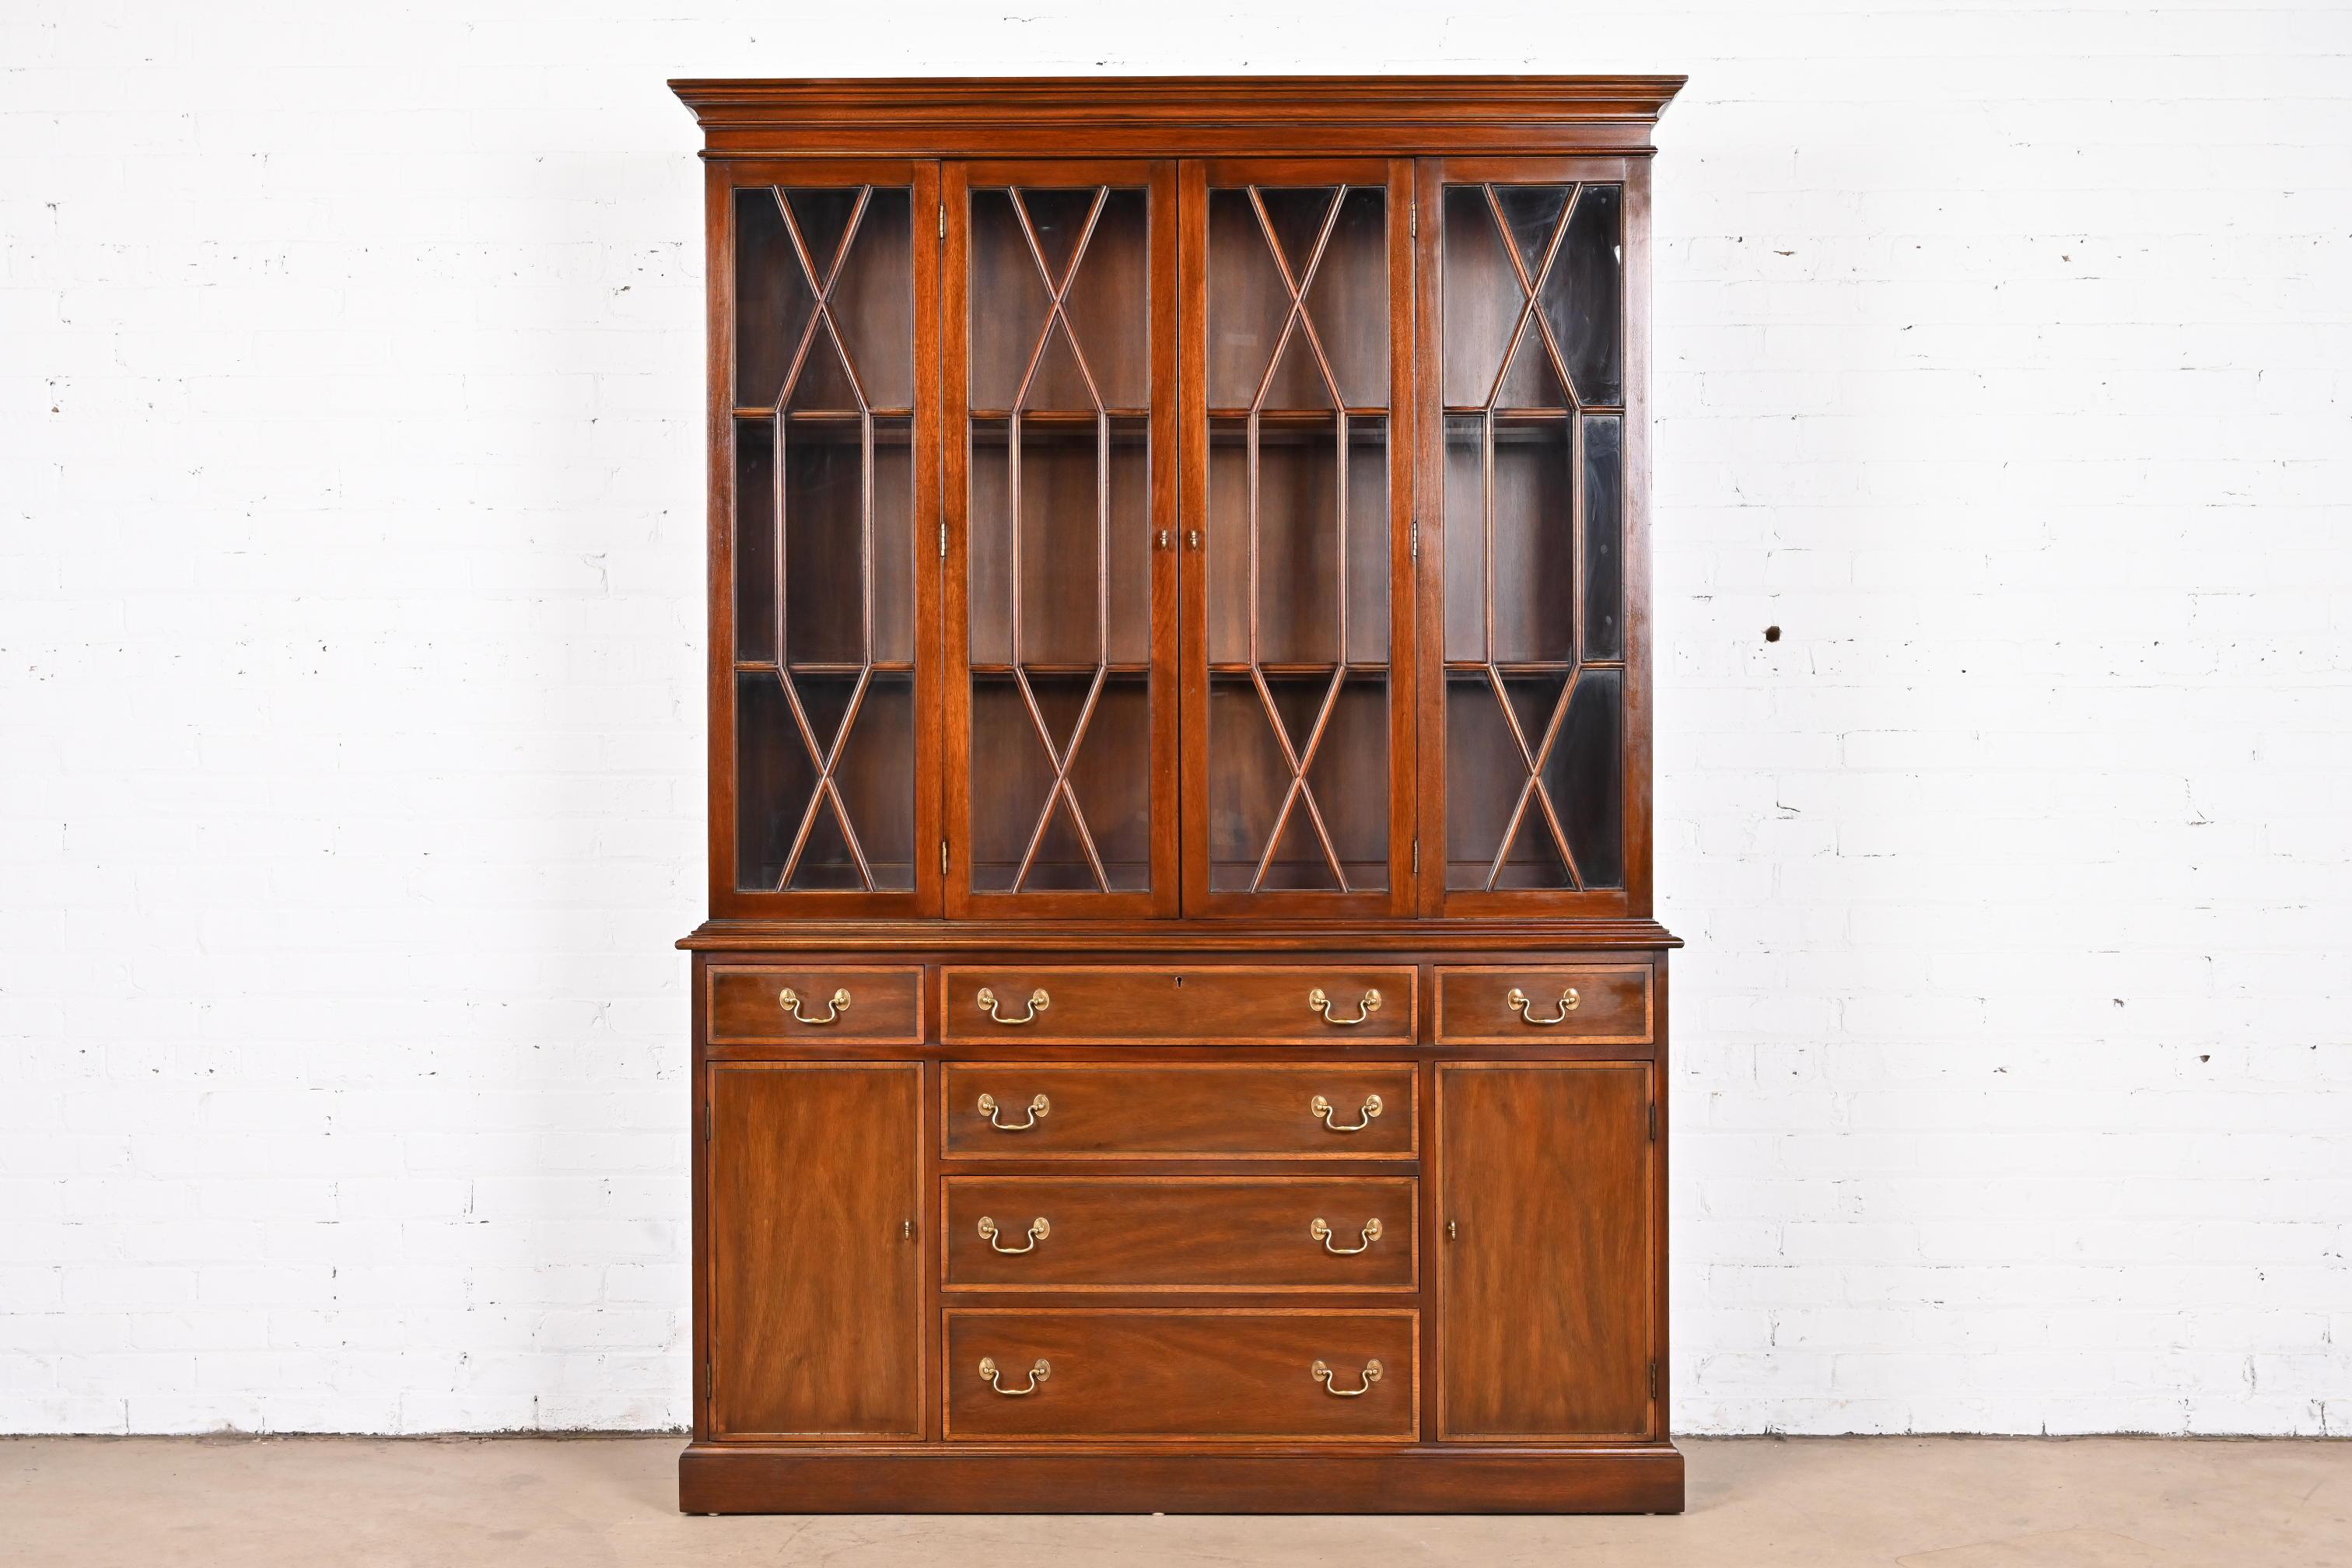 A gorgeous Georgian or Chippendale style lighted breakfront bookcase or dining cabinet

By Henkel Harris

USA, 1978

Mahogany, with satinwood banding, mullioned glass front doors, and original brass hardware. Lights have been tested and are